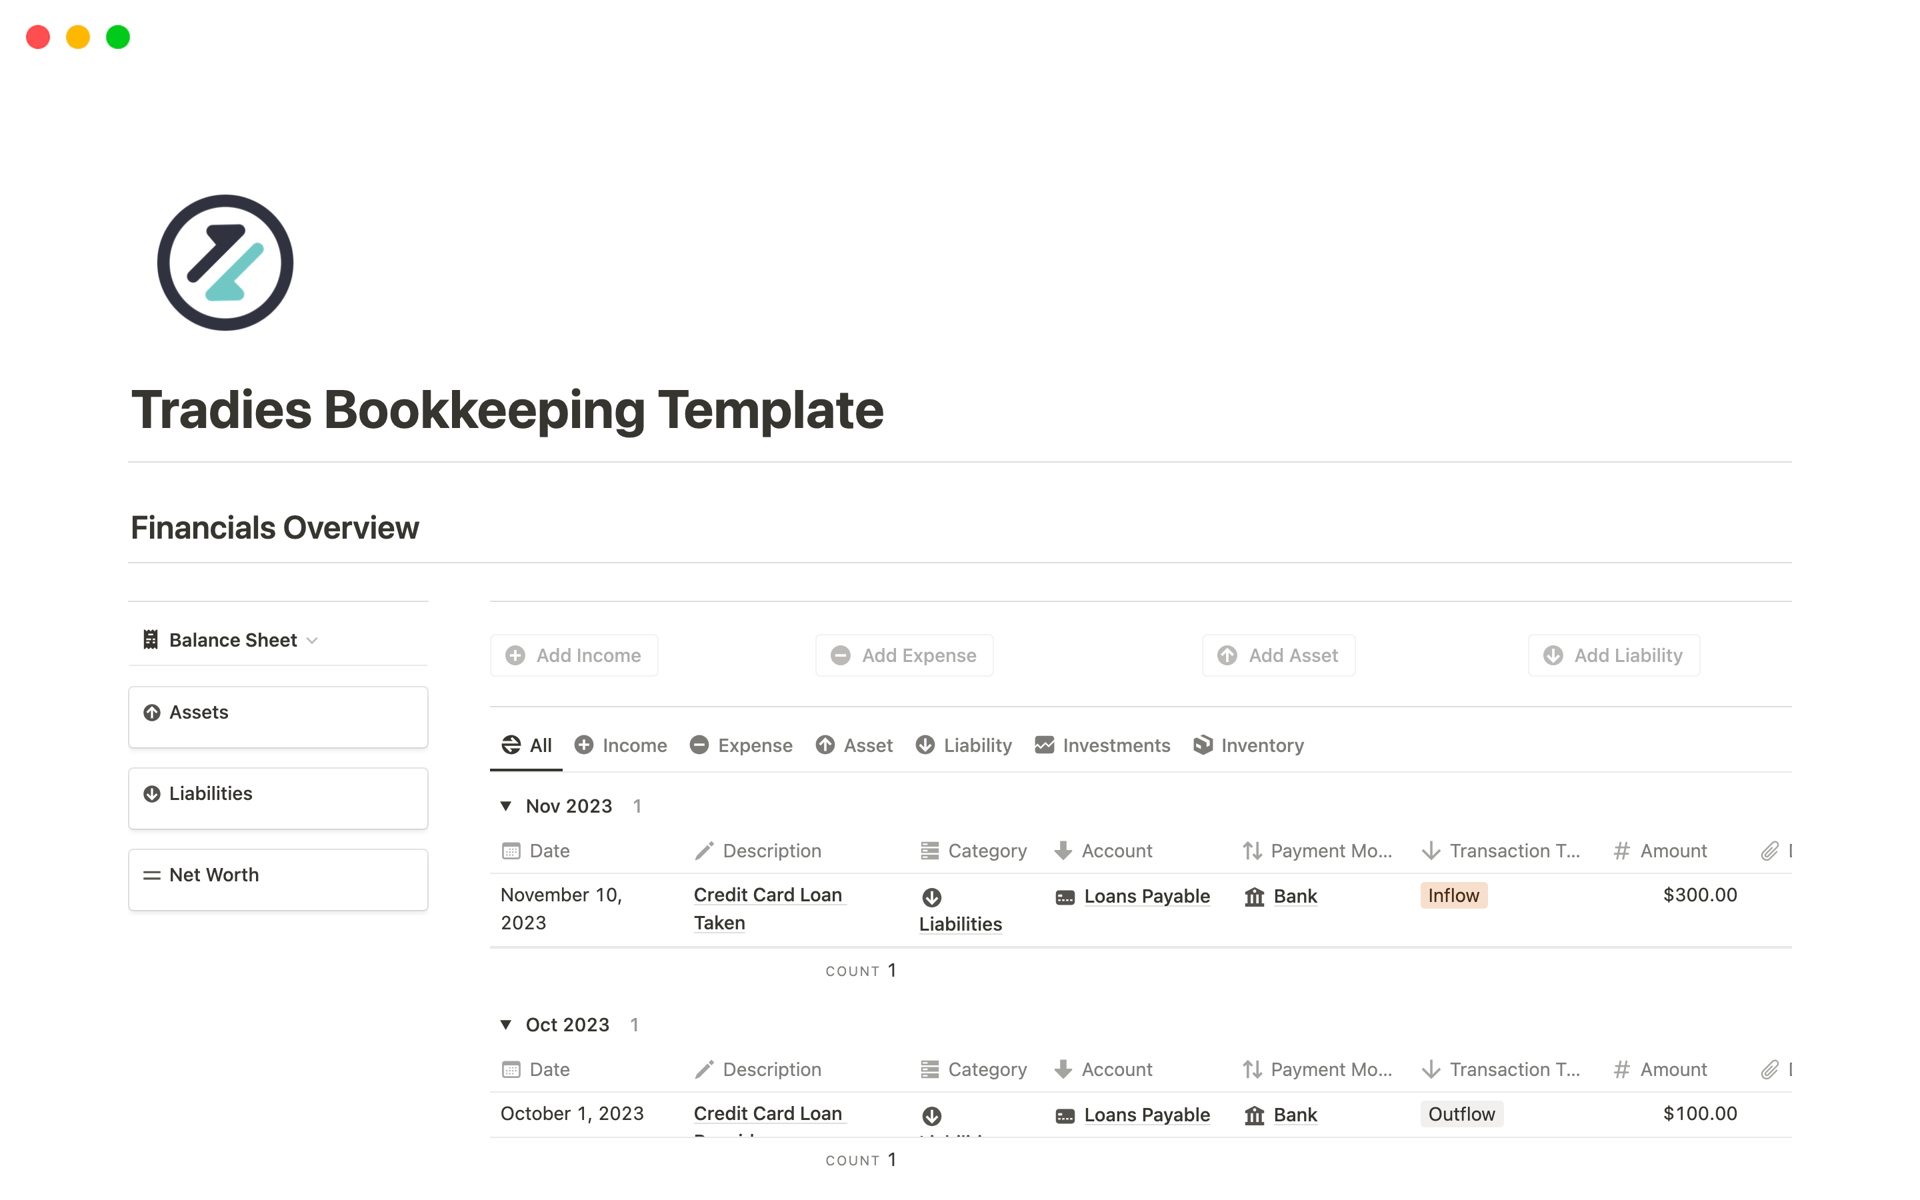 This bookkeeping template provides best solution for tradespeople to manage their business finances, produce income statement, balance sheet, cash flow statement and much more on a periodical basis.